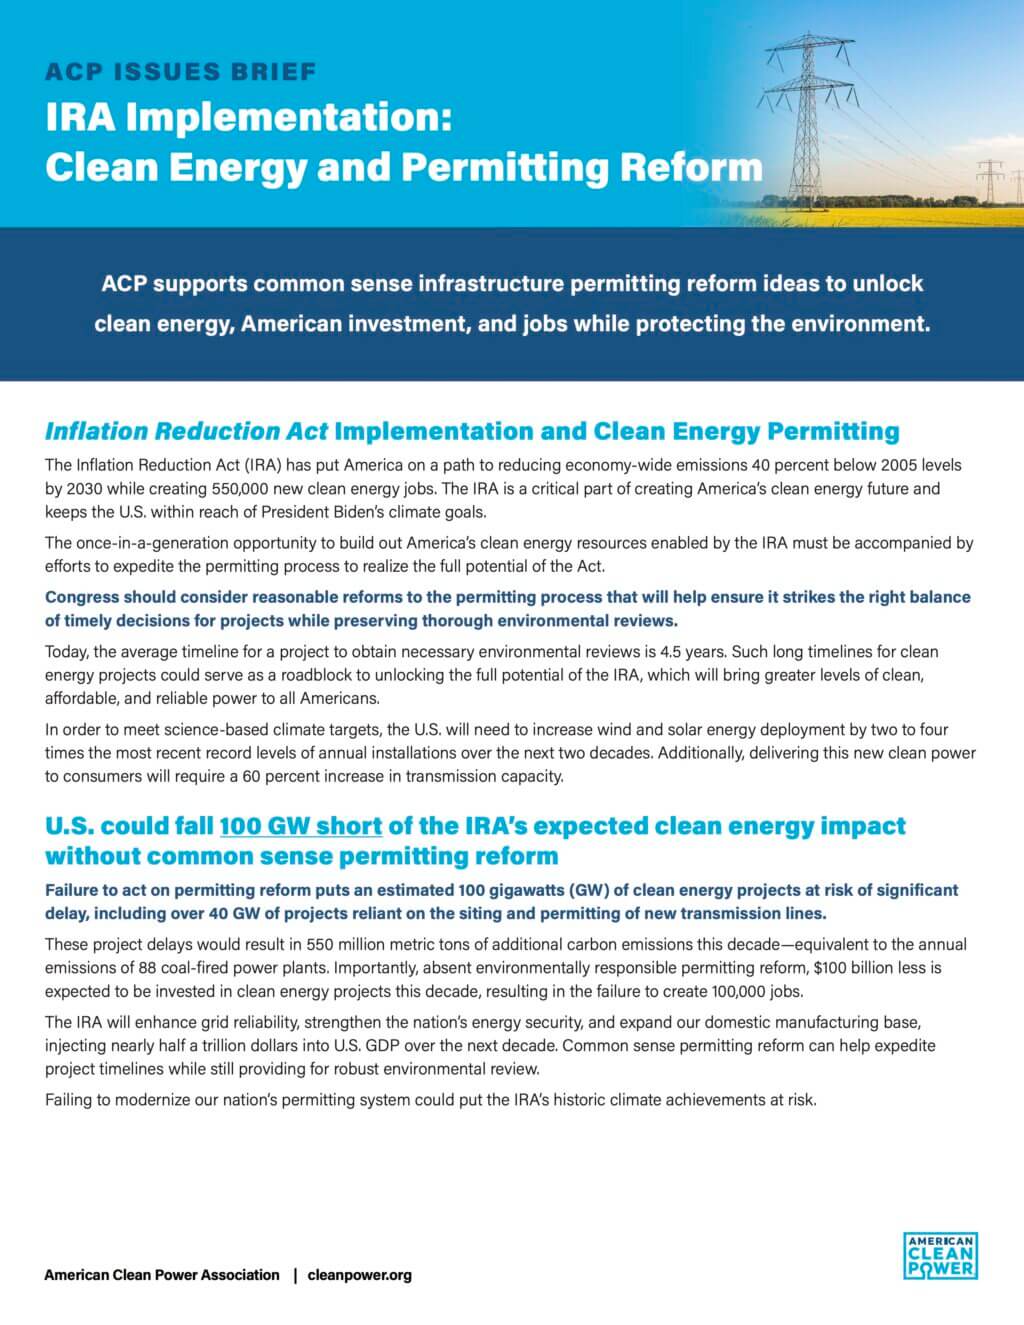 ACP Publication on IRA Implementation: Clean energy and Permitting Reform.